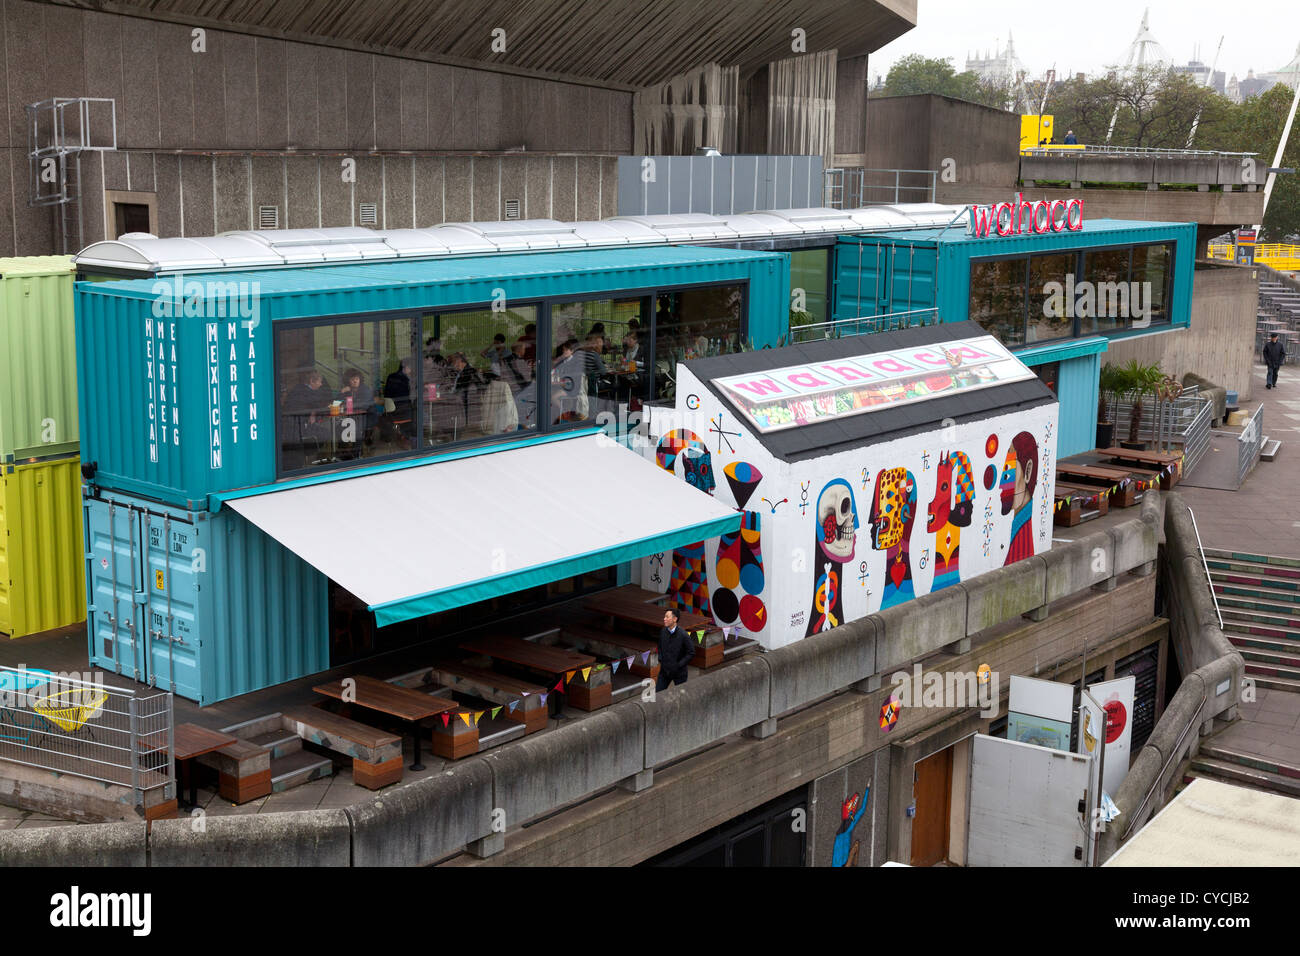 https://c8.alamy.com/comp/CYCJB2/wahaca-mexican-restaurant-on-londons-south-bank-constructed-from-recycled-CYCJB2.jpg